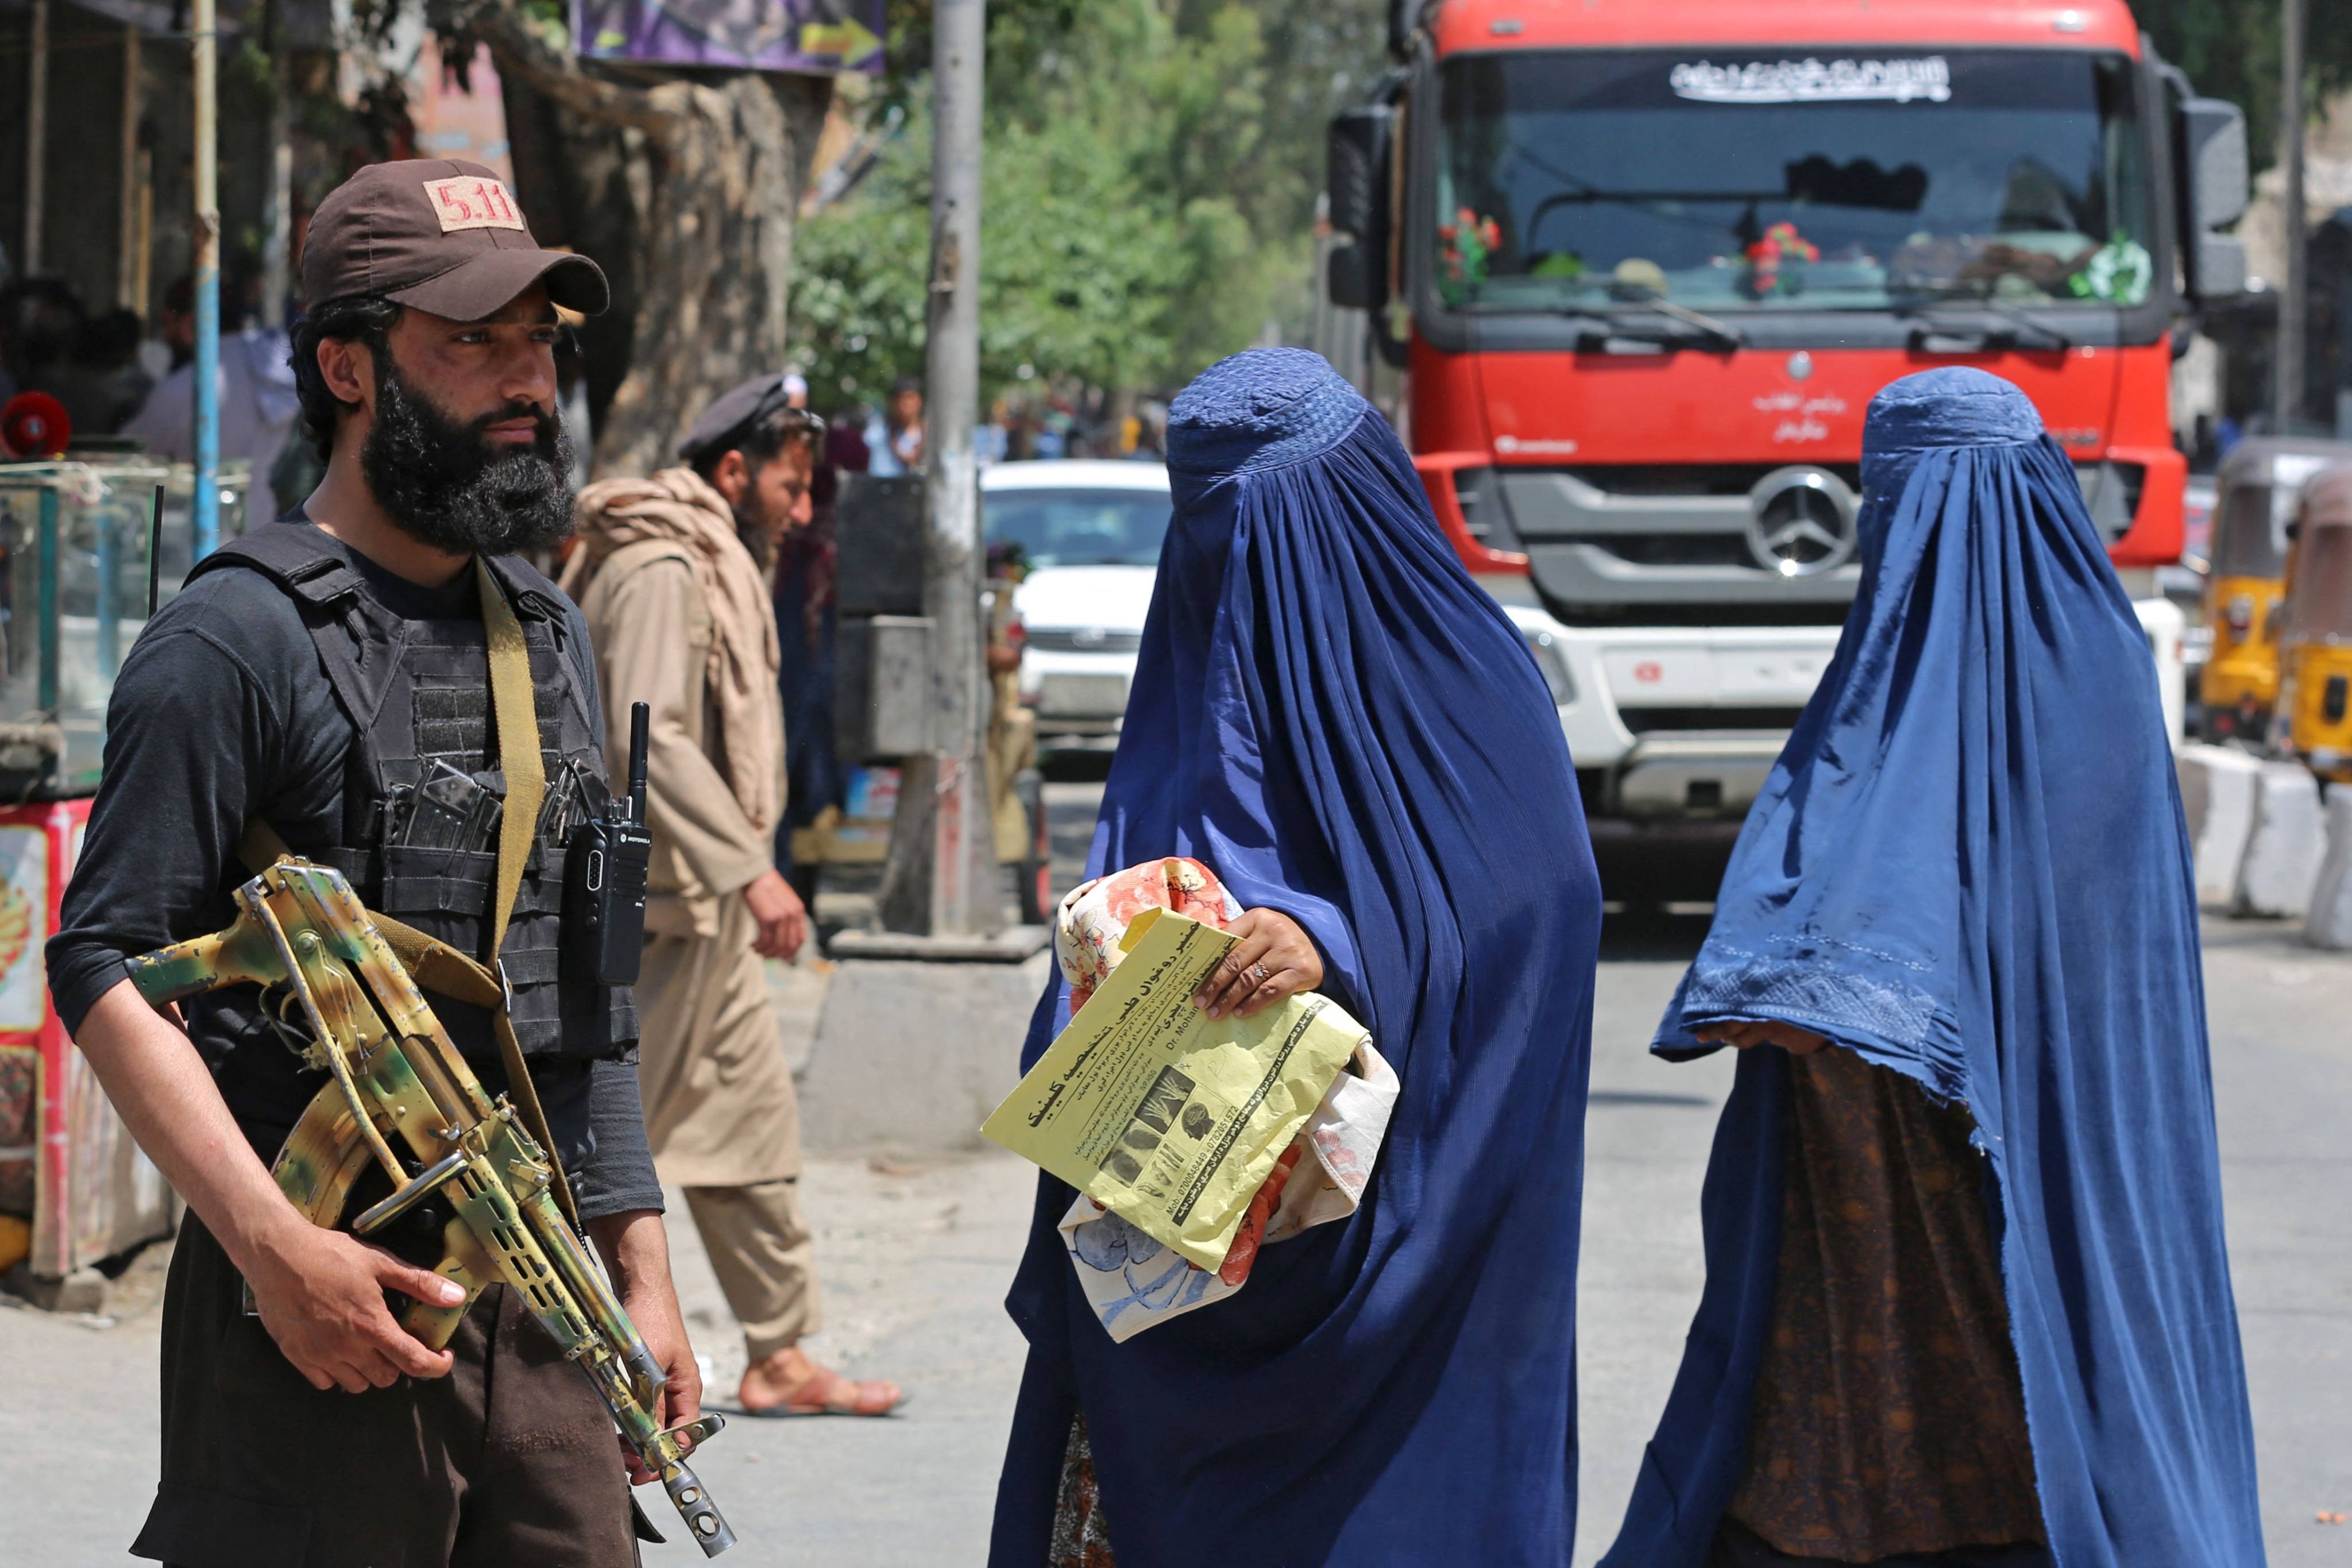 The rights of women in Afghanistan have diminished under the Taliban. Photo: AFP